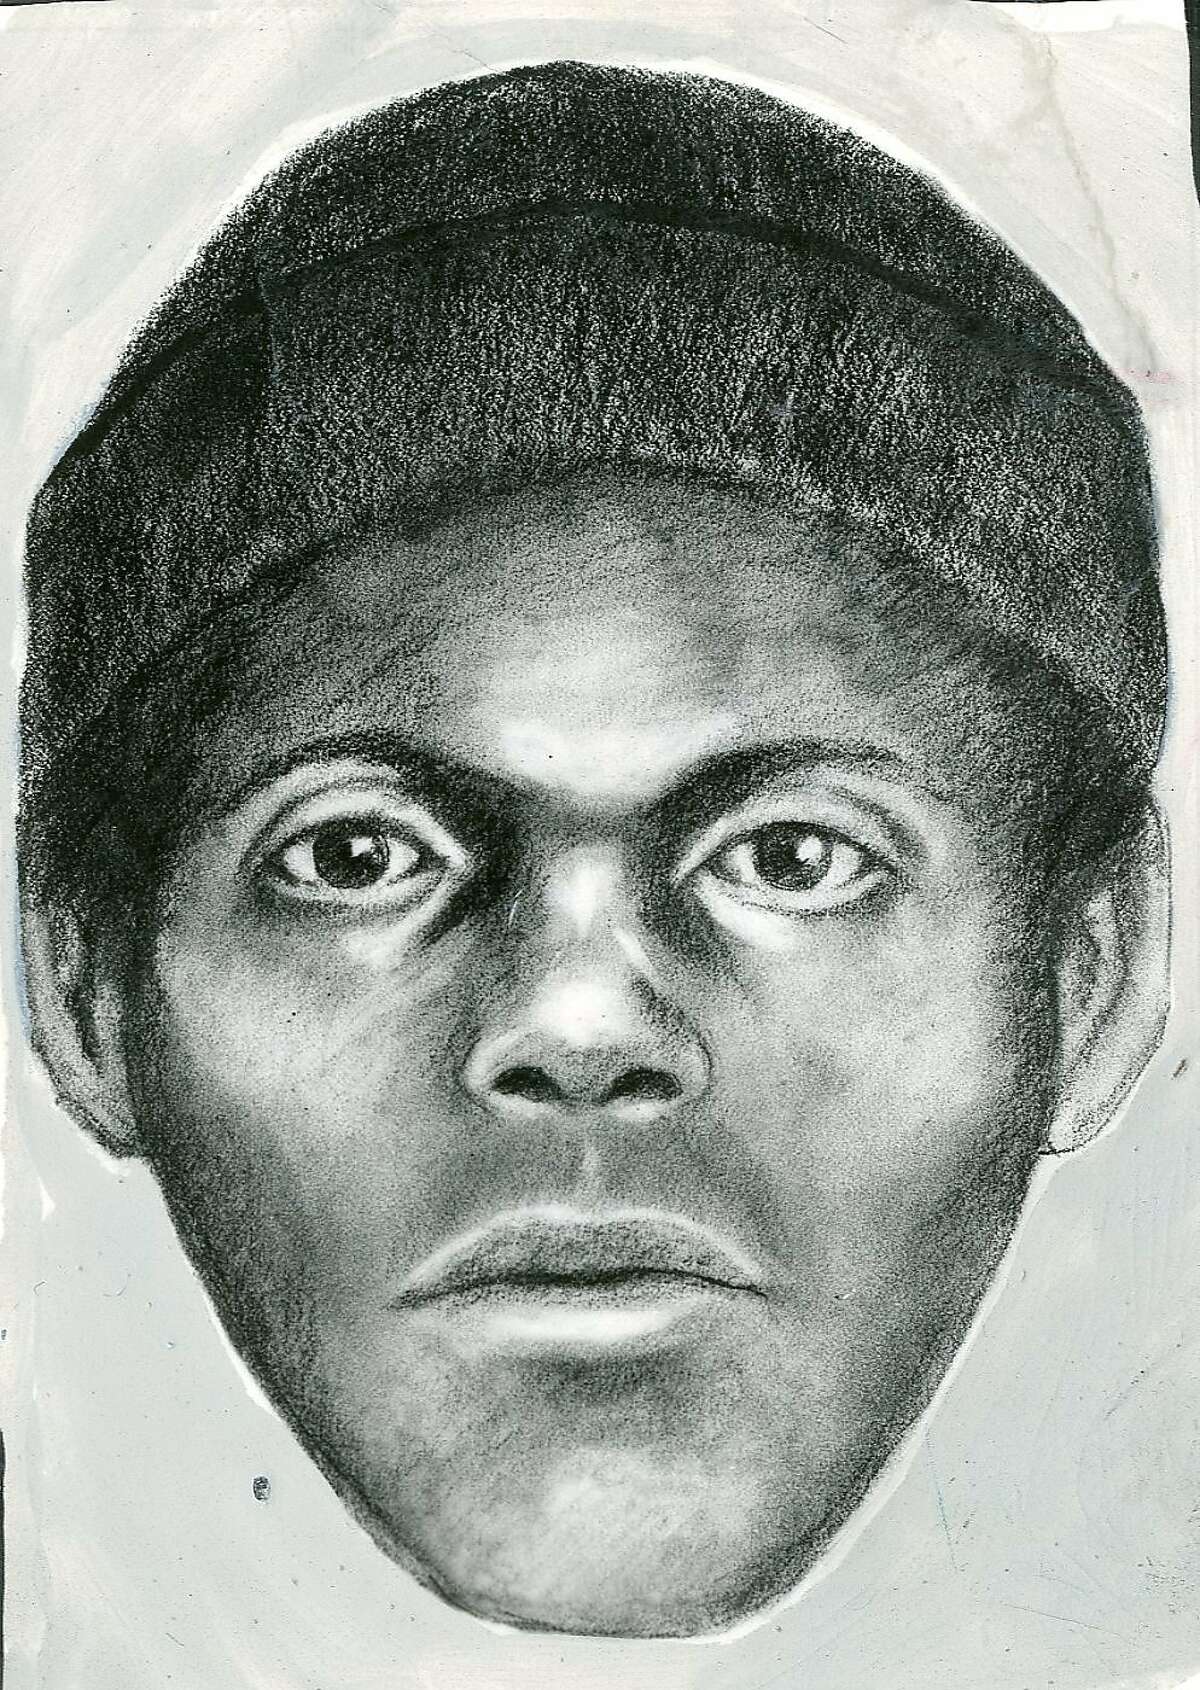 This sketch of a man, nicknamed the Doodlerwho is suspected of committing 6 murders with the victims being gay men during 1974-75. Photo ran 01/20/1976